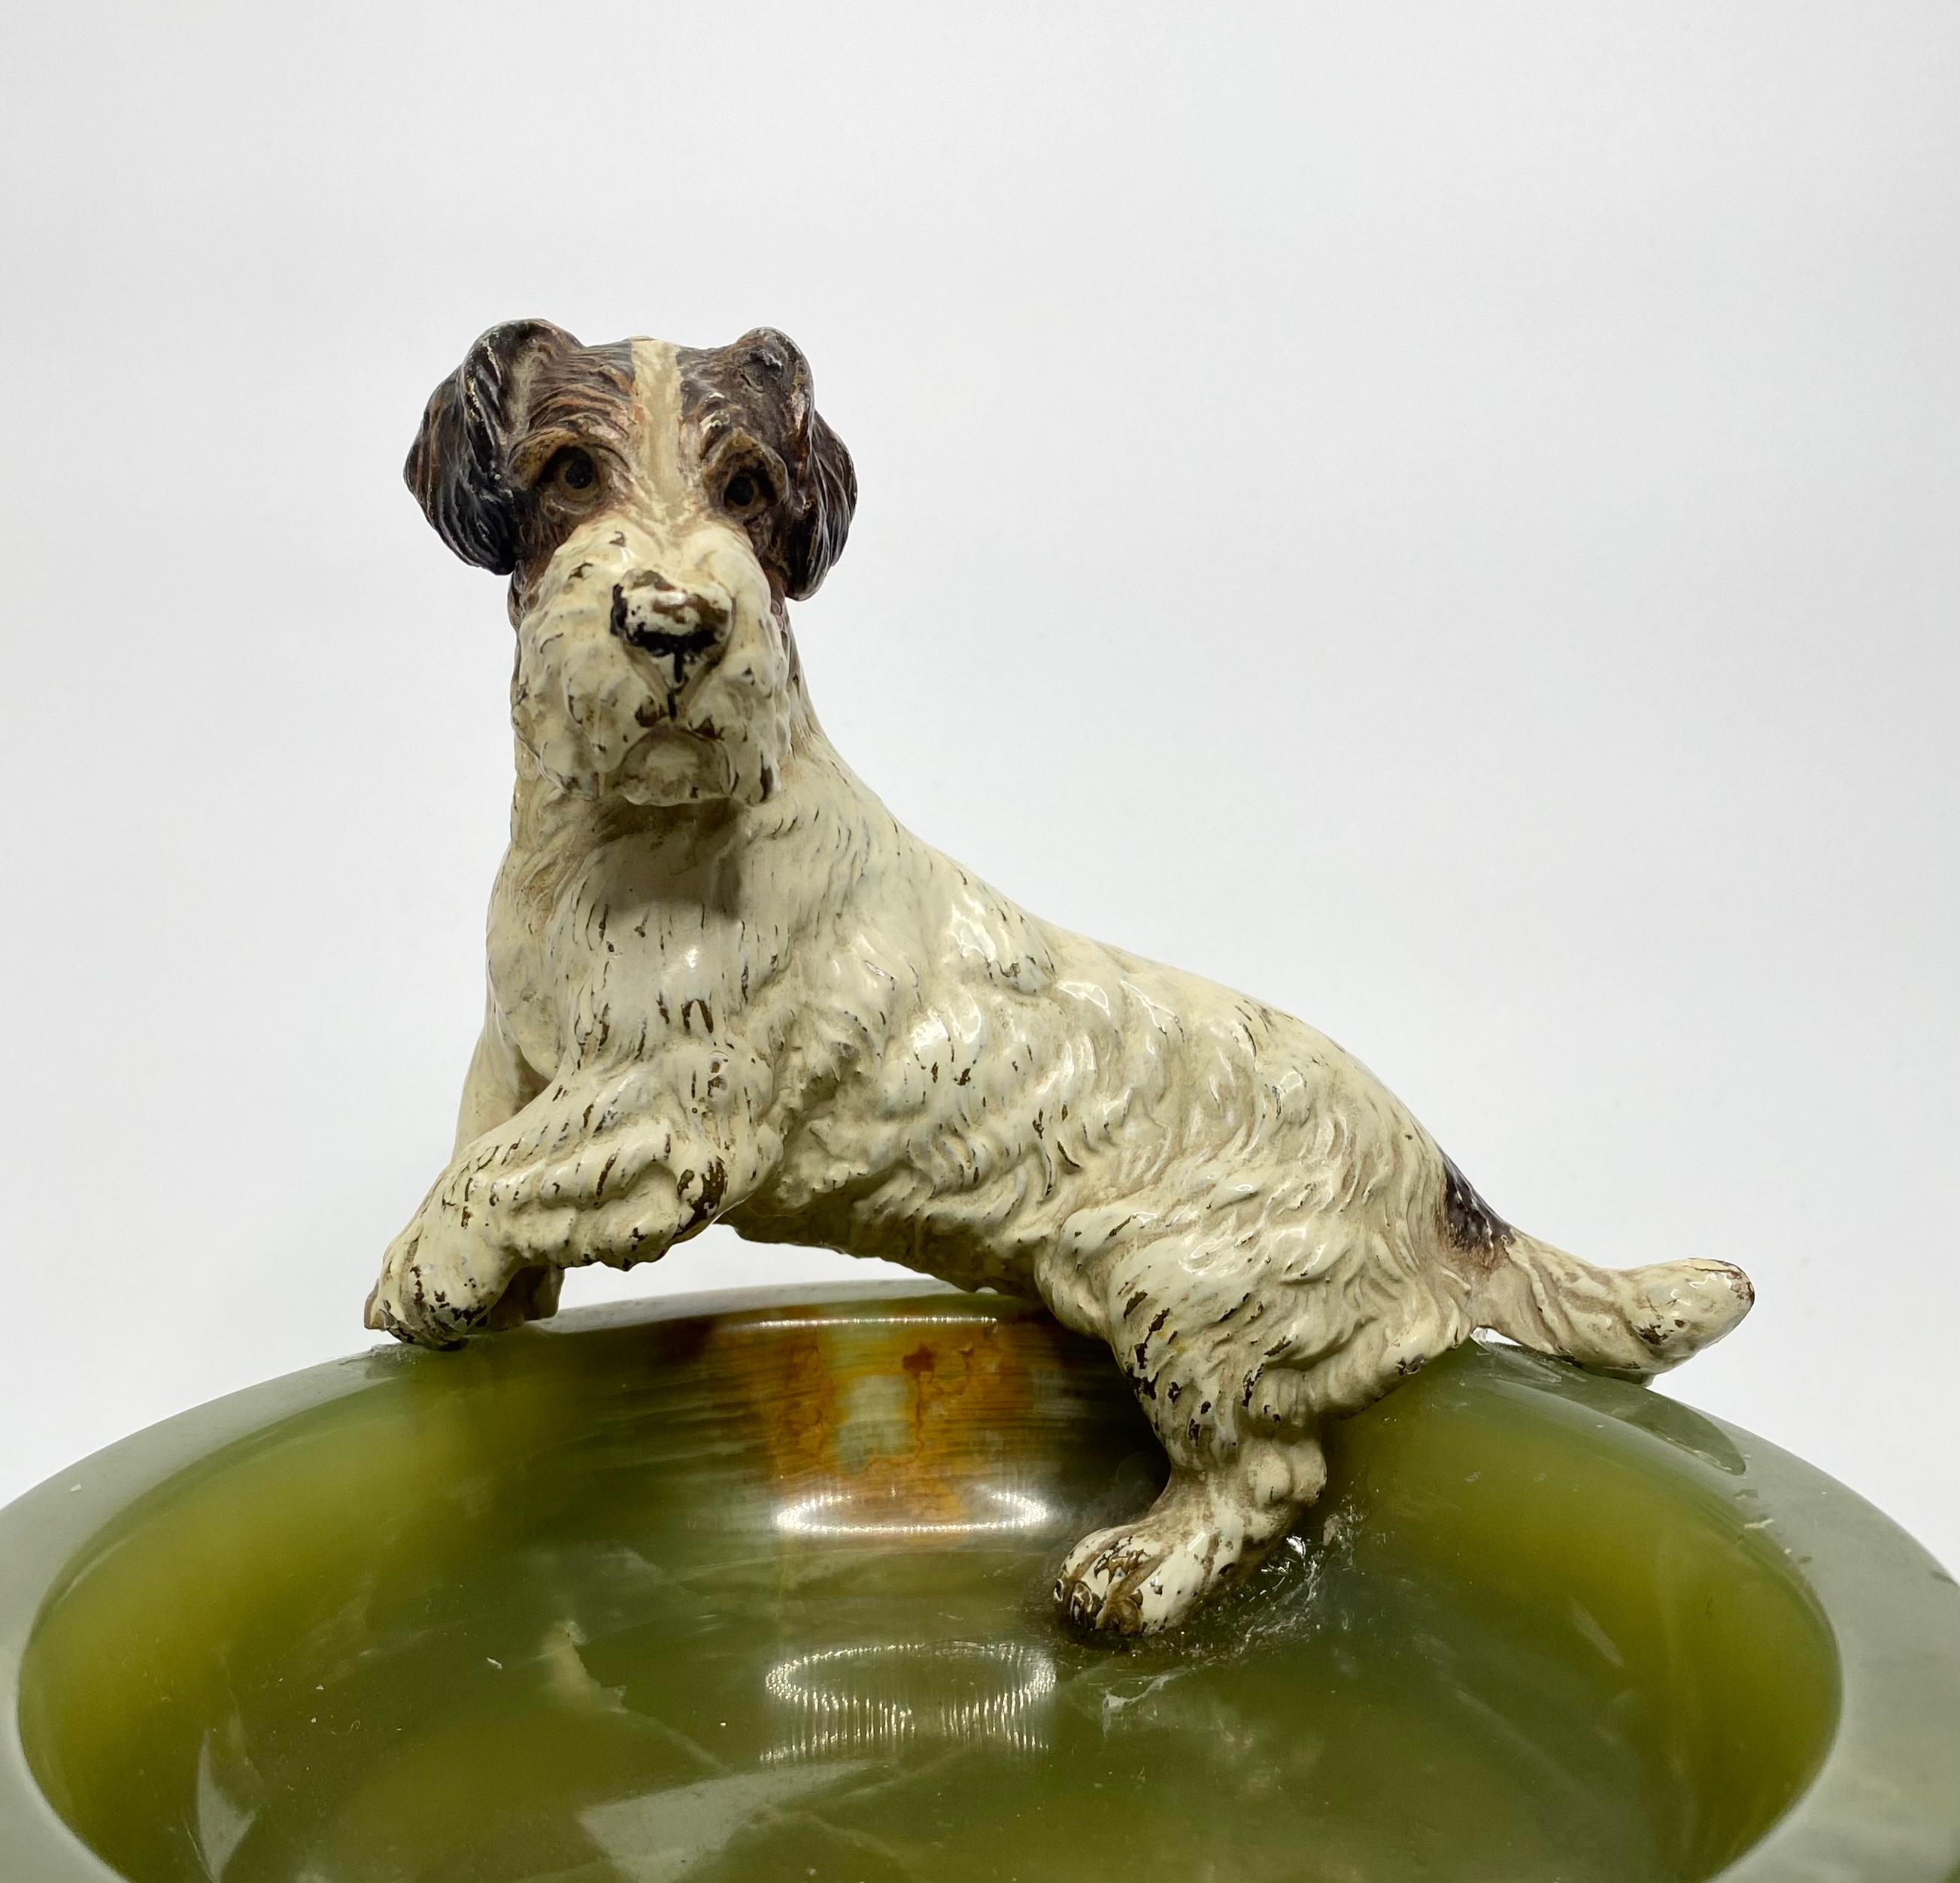 Austrian cold painted bronze Fox Terrier, circa 1900.

£490.00
Austrian cold painted bronze Fox Terrier, c. 1900. A particularly well cast example, with detail such as the eyes well defined. Naturalistically painted in enamels.
He stands upon